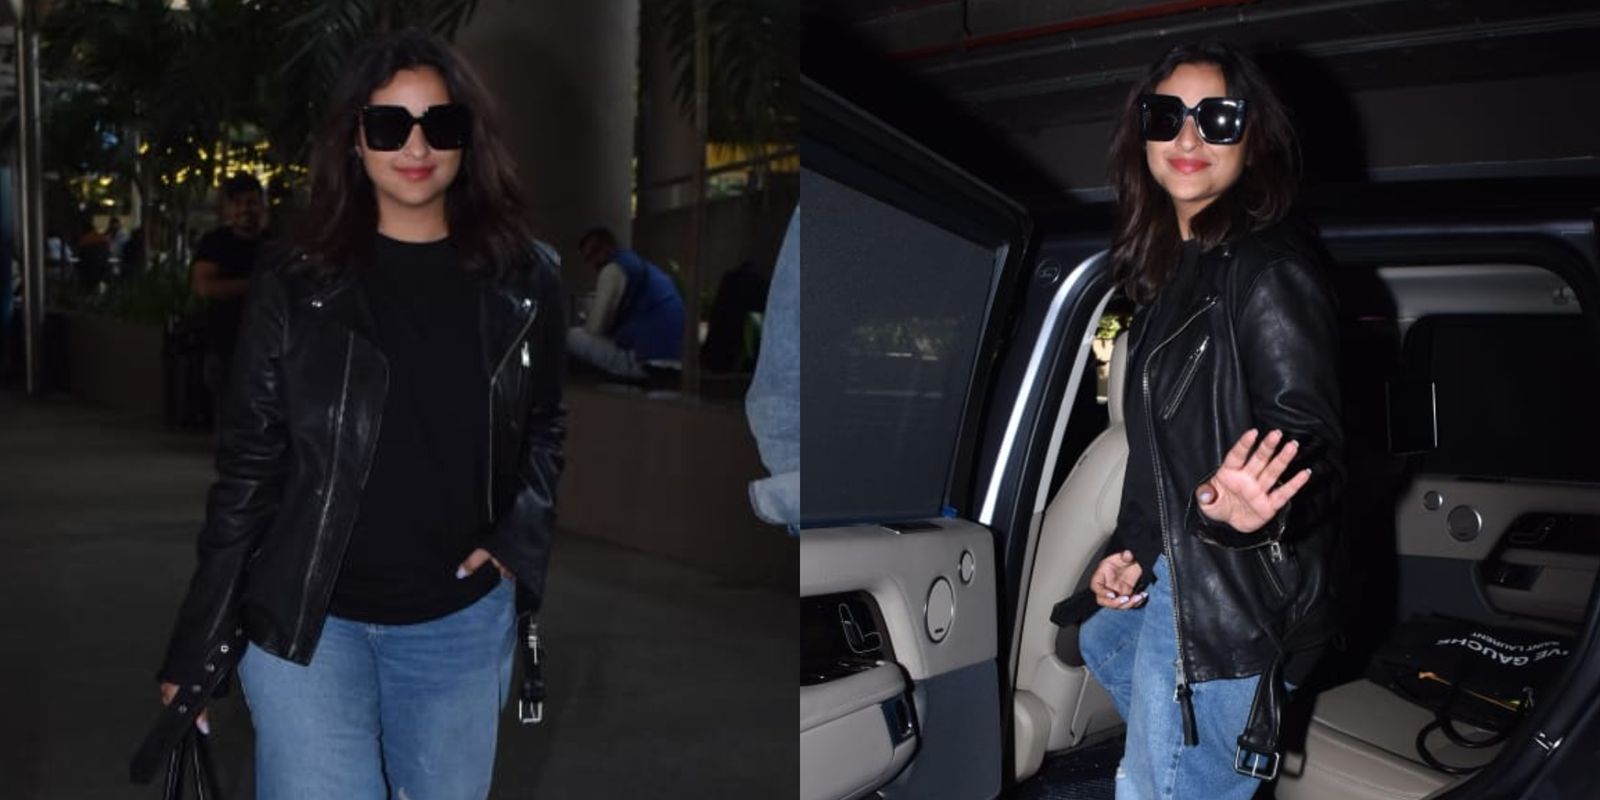 Parineeti Chopra Slays In A Rocker Chic Outfit At The Airport; Get The Look